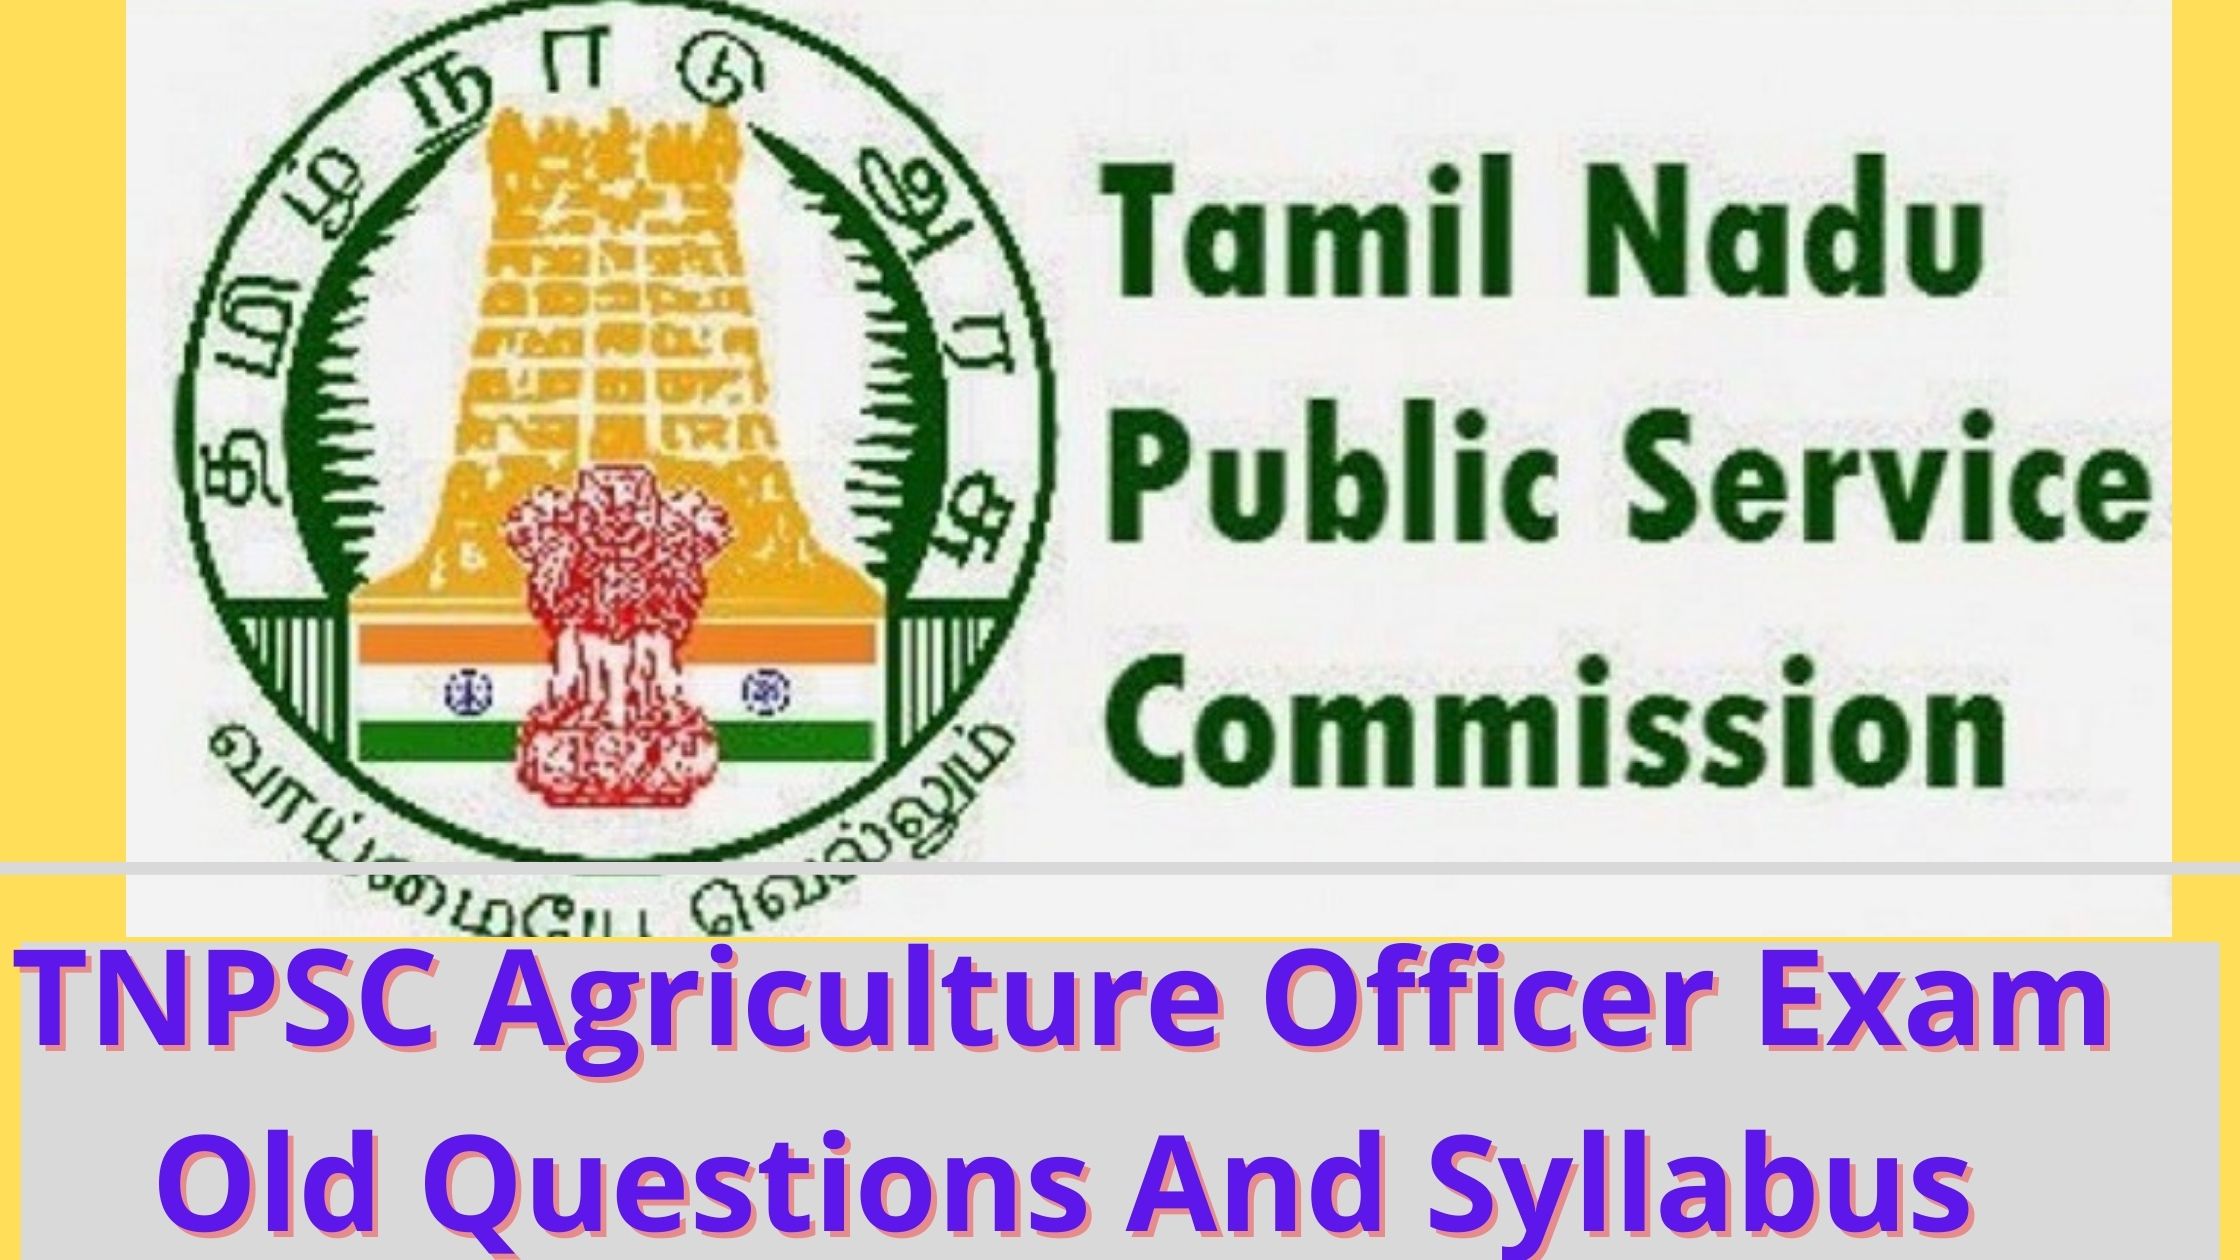 tnpsc agriculture officer old exam questions,tnpsc agriculture officer exam,tnpsc agriculture officer,agriculture officer,tnpsc,tnpsc agricultural officer exam study material,tnpsc agriculture officer exam preparation,agricultural officer,tnpsc agriculture officer 2020,tnpsc agriculture officer exam 2021,tnpsc agriculture officer ao syllabus 2020,tnpsc agriculture officer exam preparation 2021,assistant agriculture officer,agriculture officer tnpsc,tnpsc agriculture officer salary,tnpsc agriculture officer book list